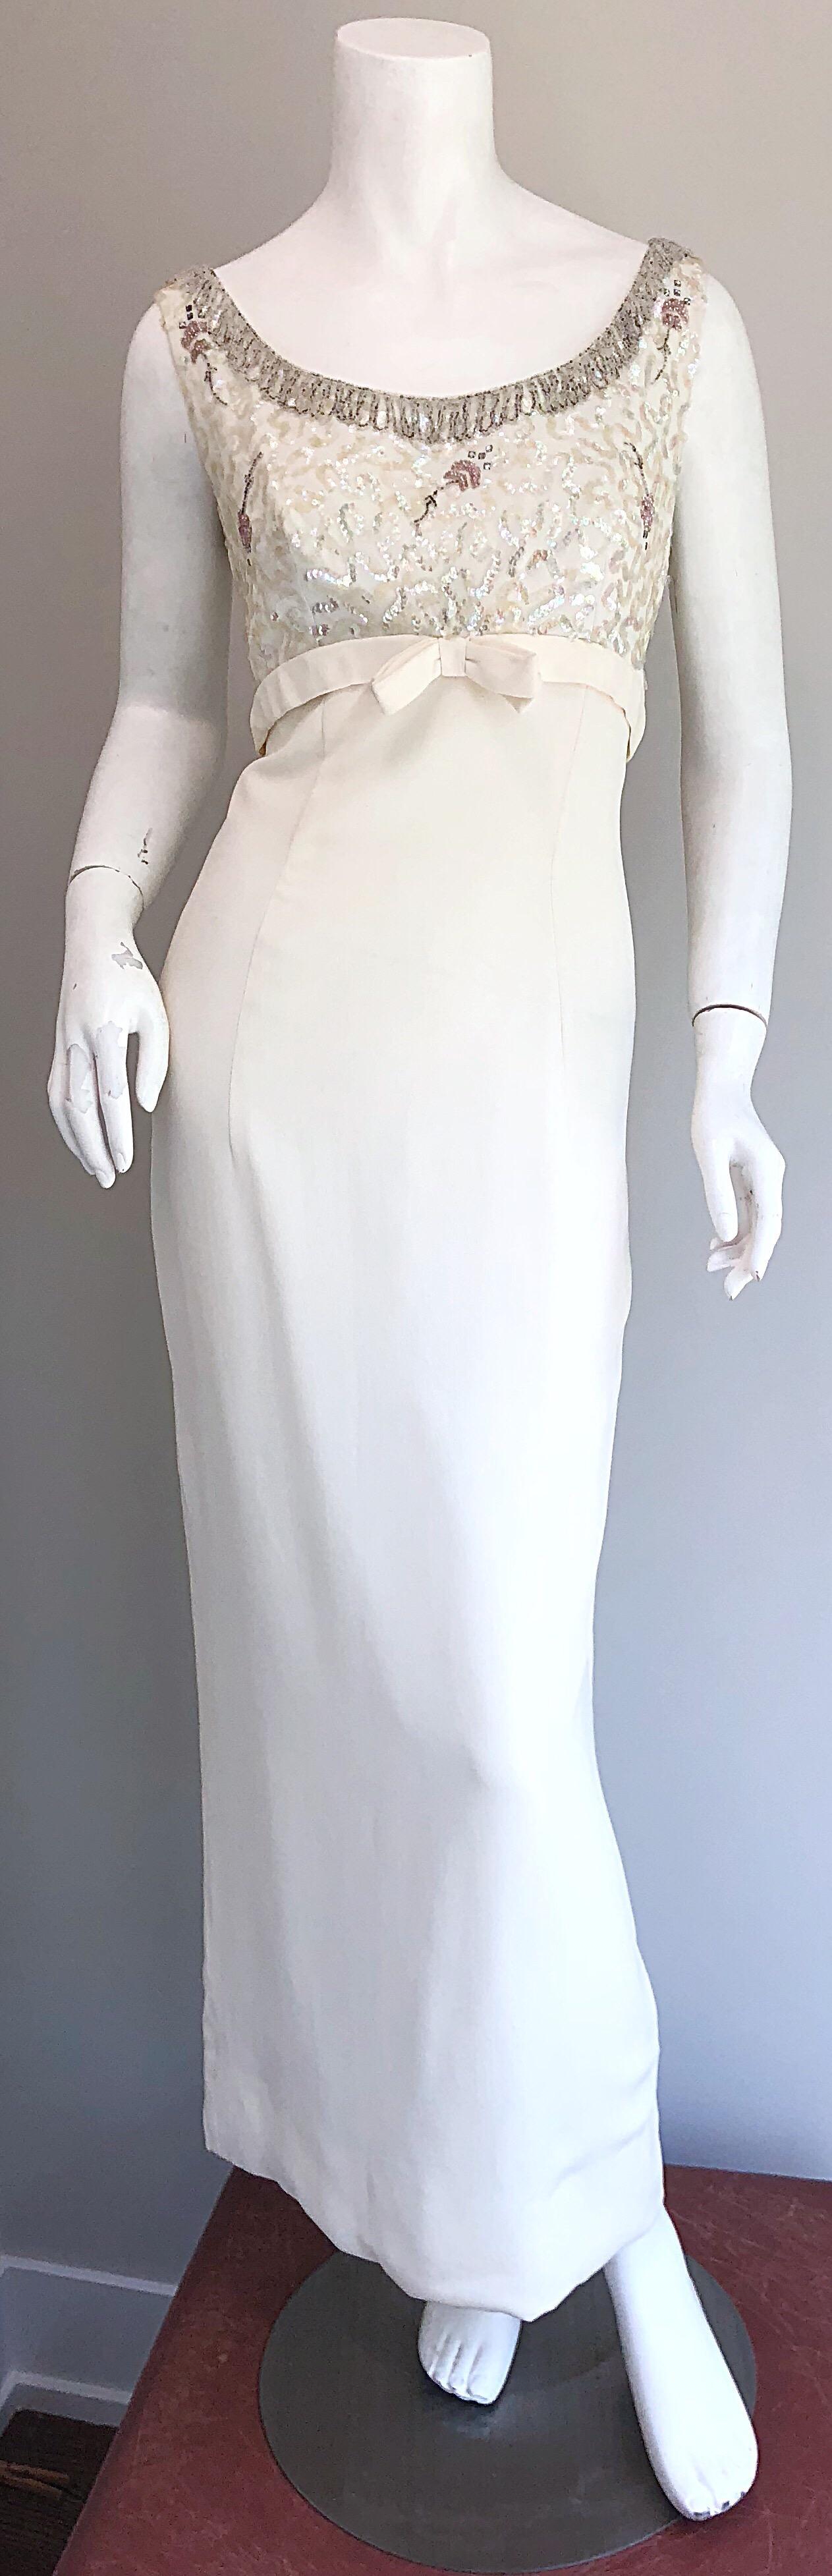 Gorgeous 1960s White Sequin Beaded Vintage Crepe 60s Evening Gown Dress 6